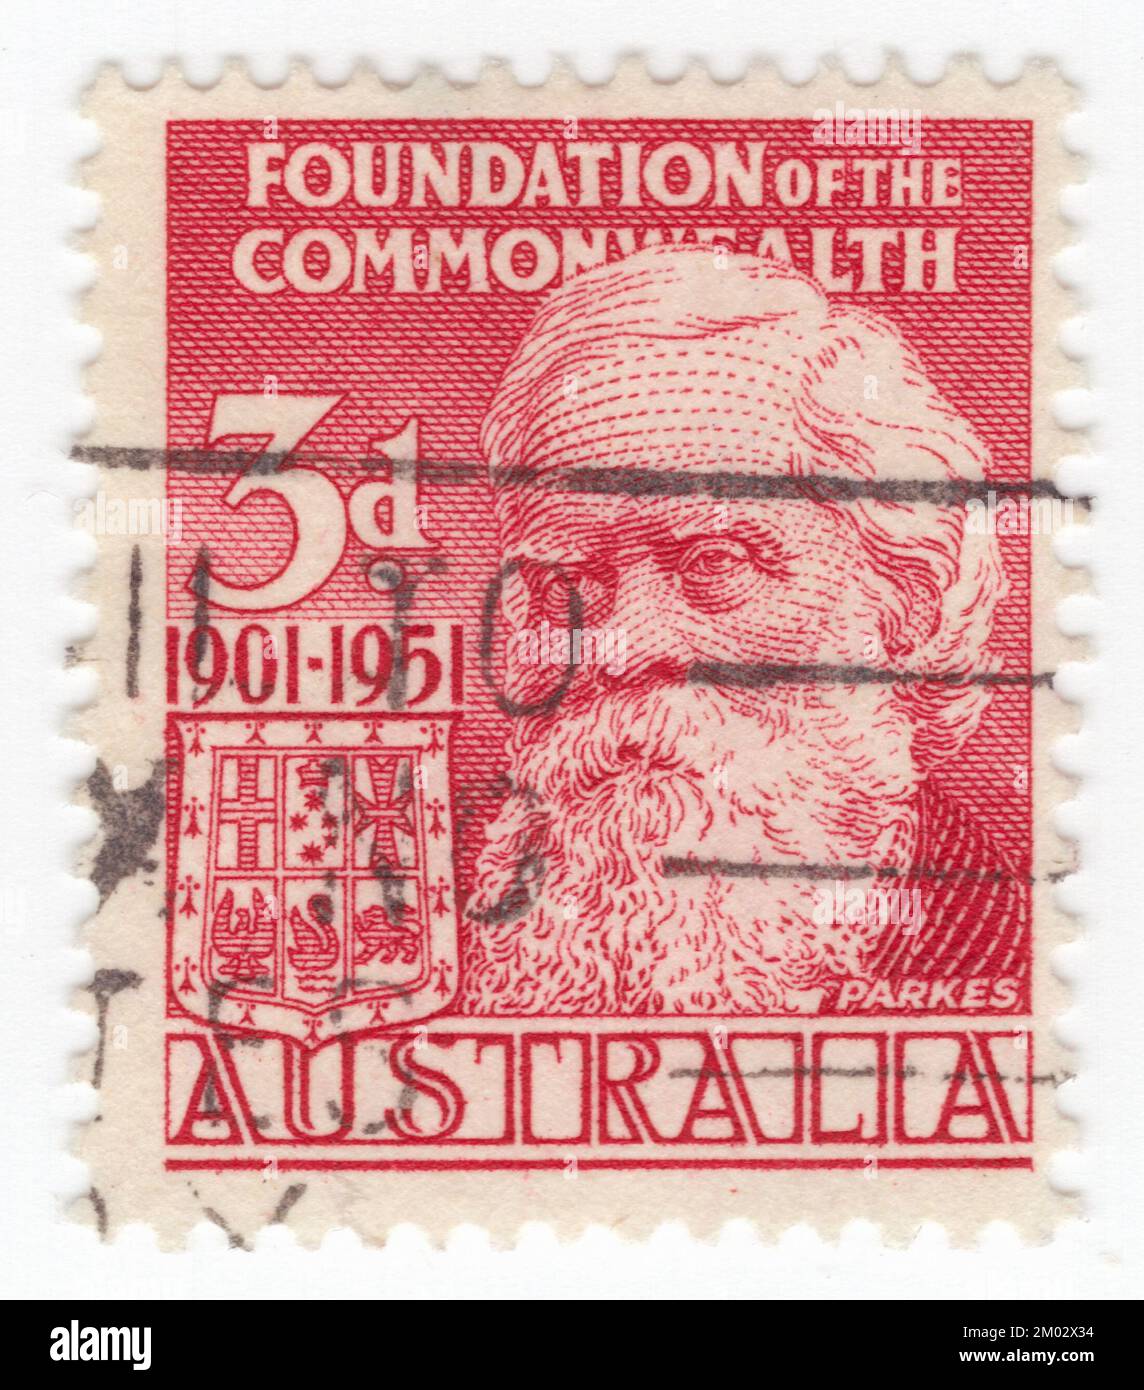 AUSTRALIA — 1951 May 1: An 3 pence carmine postage stamp depicting portrait of Sir Henry Parkes. Founding of the Commonwealth of Australia, 50th Anniversary. Sir Henry Parkes, was a colonial Australian politician and longest non-consecutive Premier of the Colony of New South Wales, the present-day state of New South Wales in the Commonwealth of Australia. He has been referred to as the 'Father of Federation' due to his early promotion for the federation of the six colonies of Australia, as an early critic of British convict transportation and as a proponent for the expansion of the railways Stock Photo